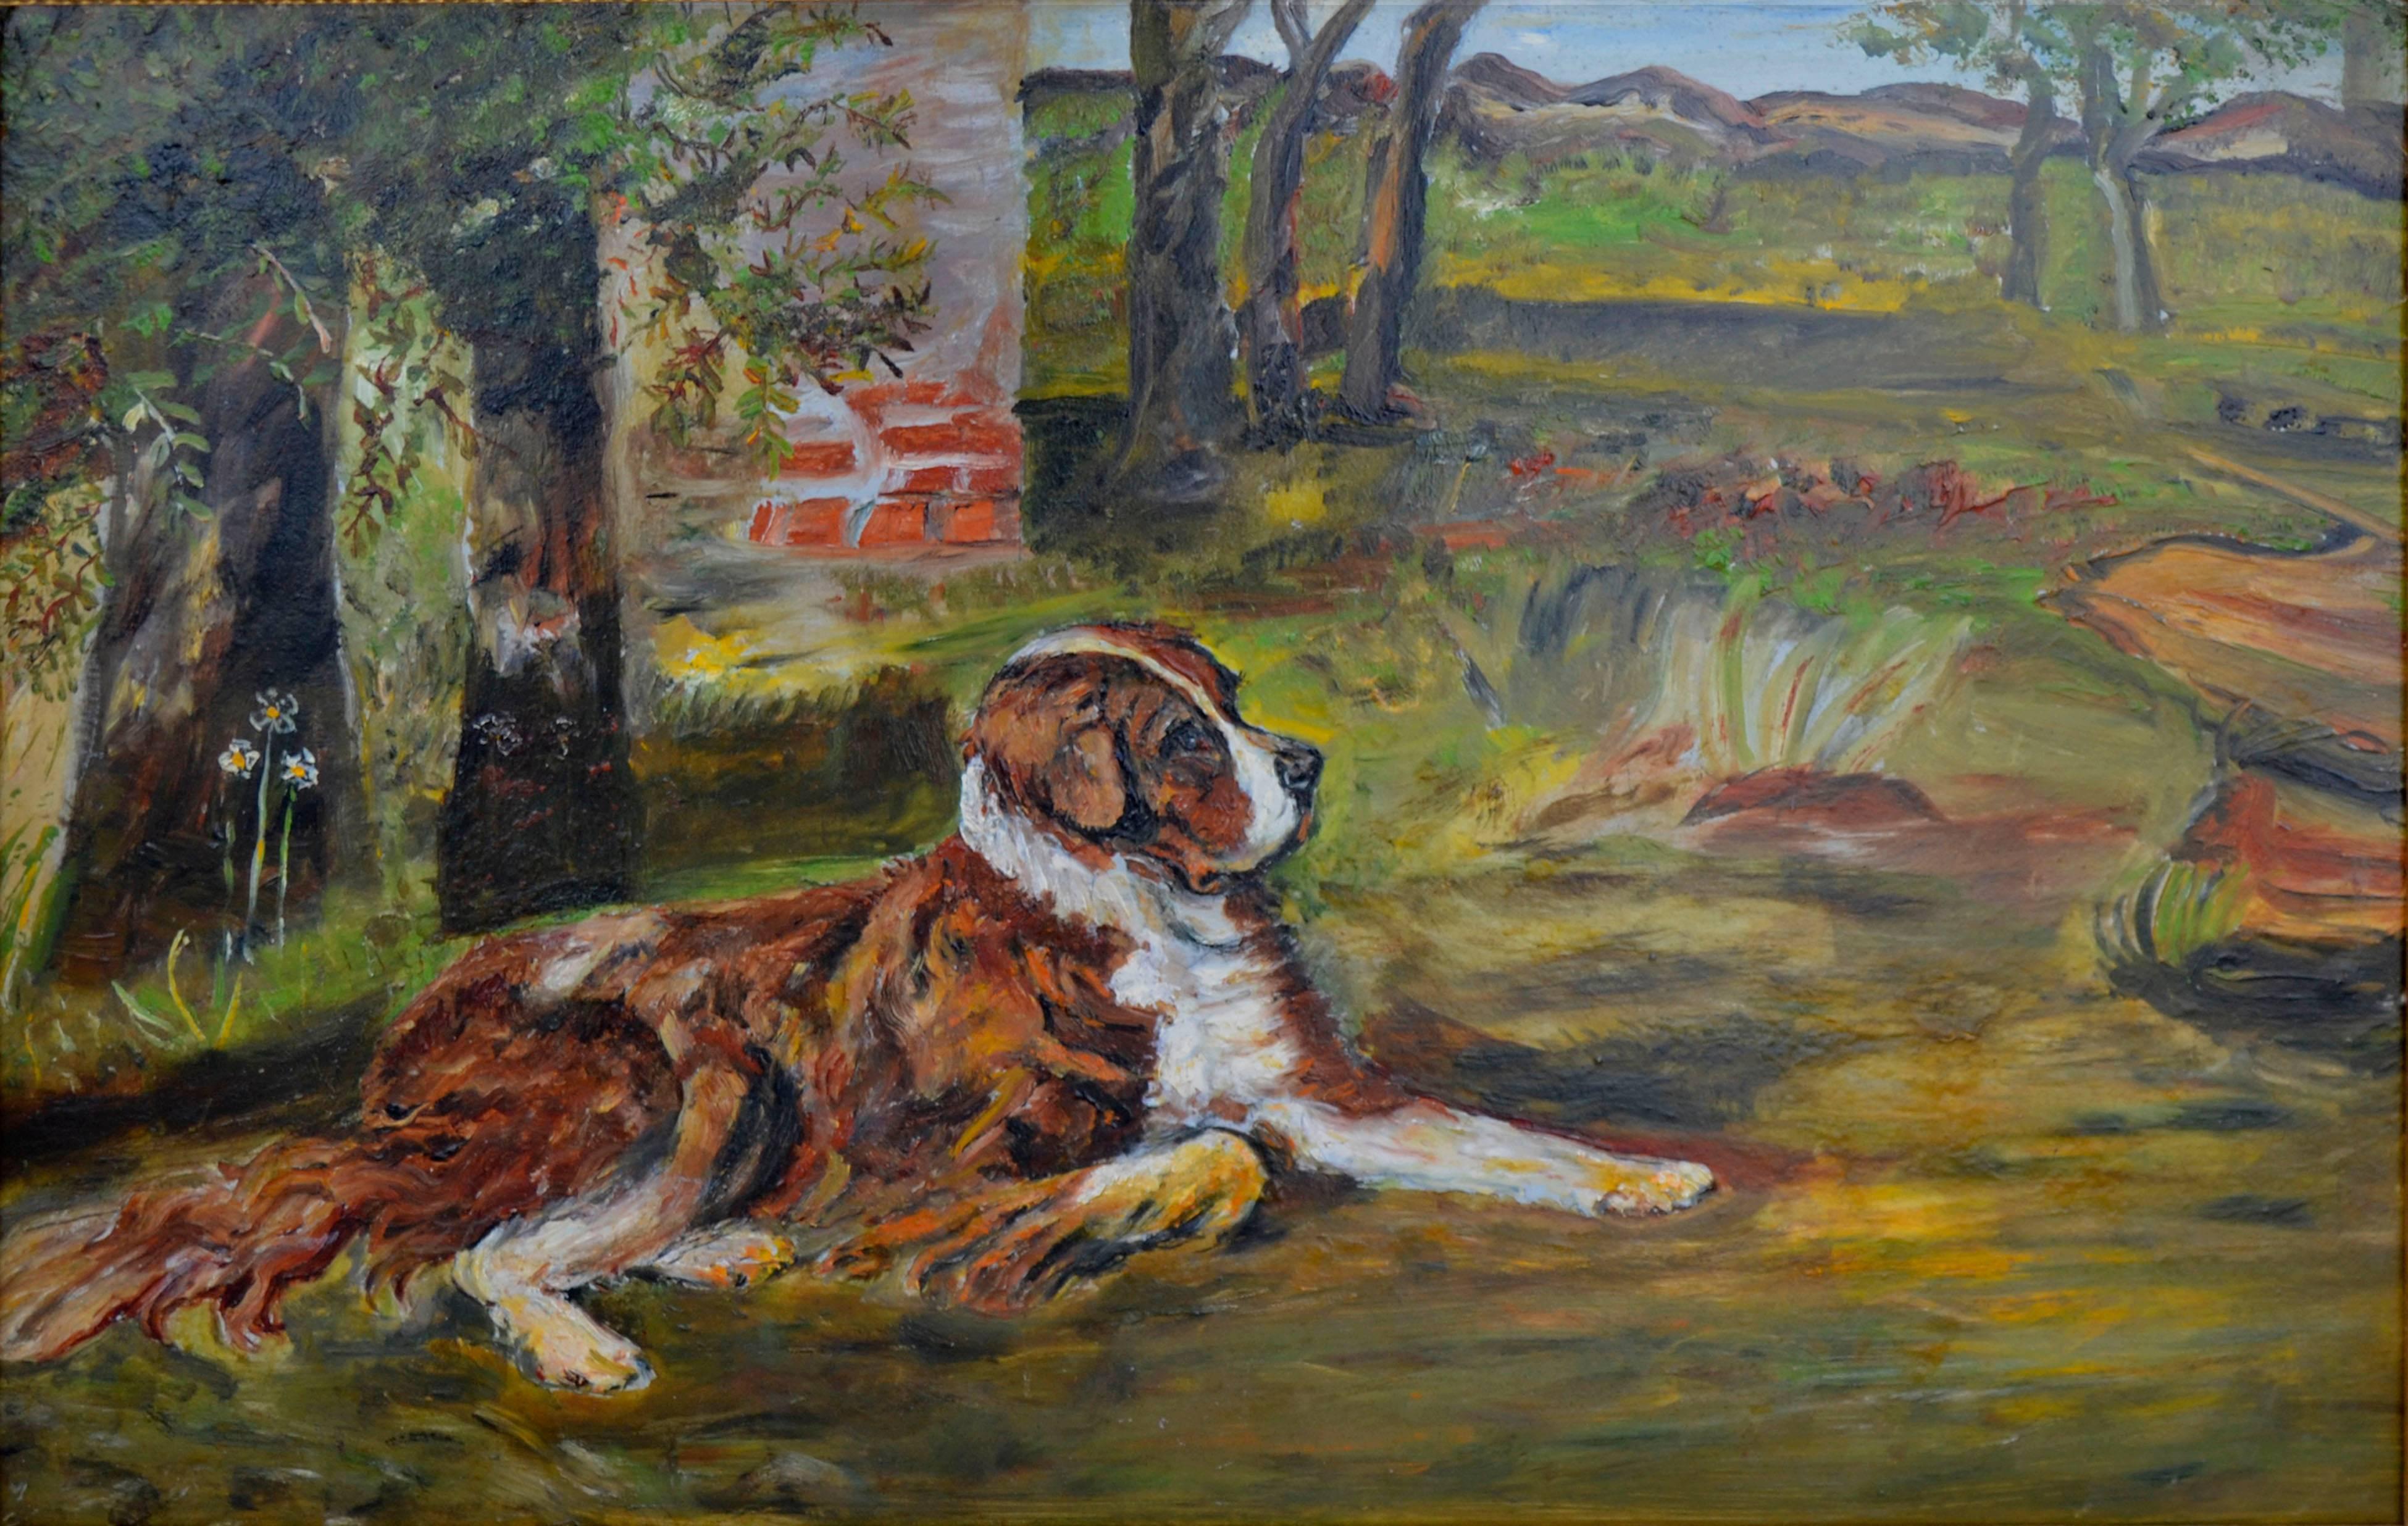 St. Bernard on the Lawn - Painting by Unknown